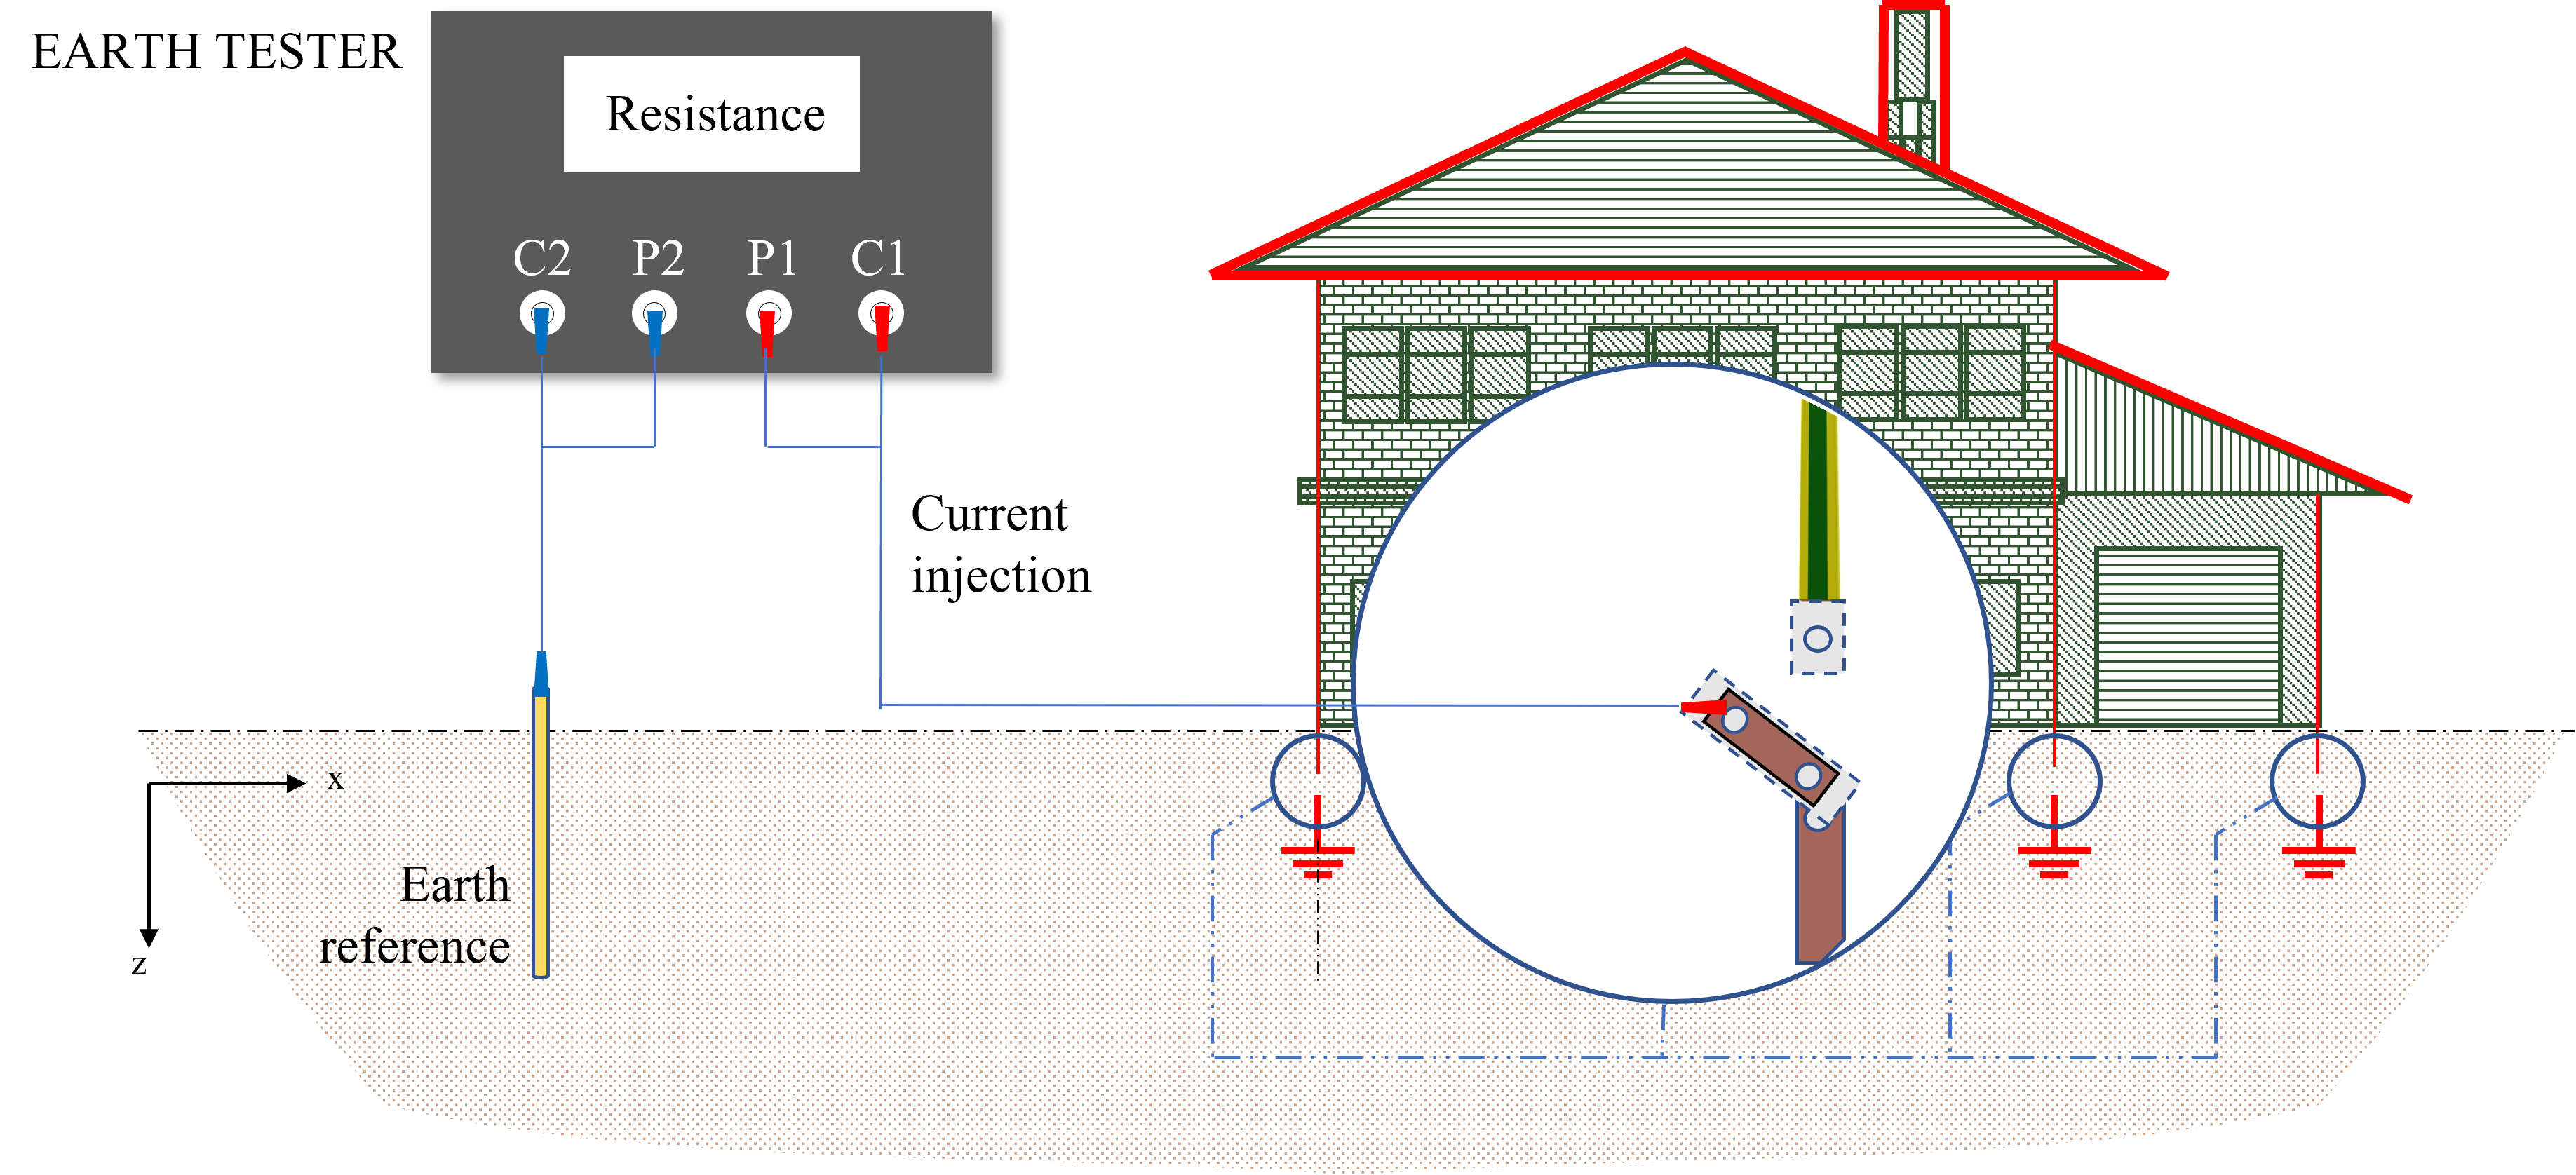 What is Electrical Earthing? - Definition, Types of Earthing & its  Importance in Electrical System - Circuit Globe